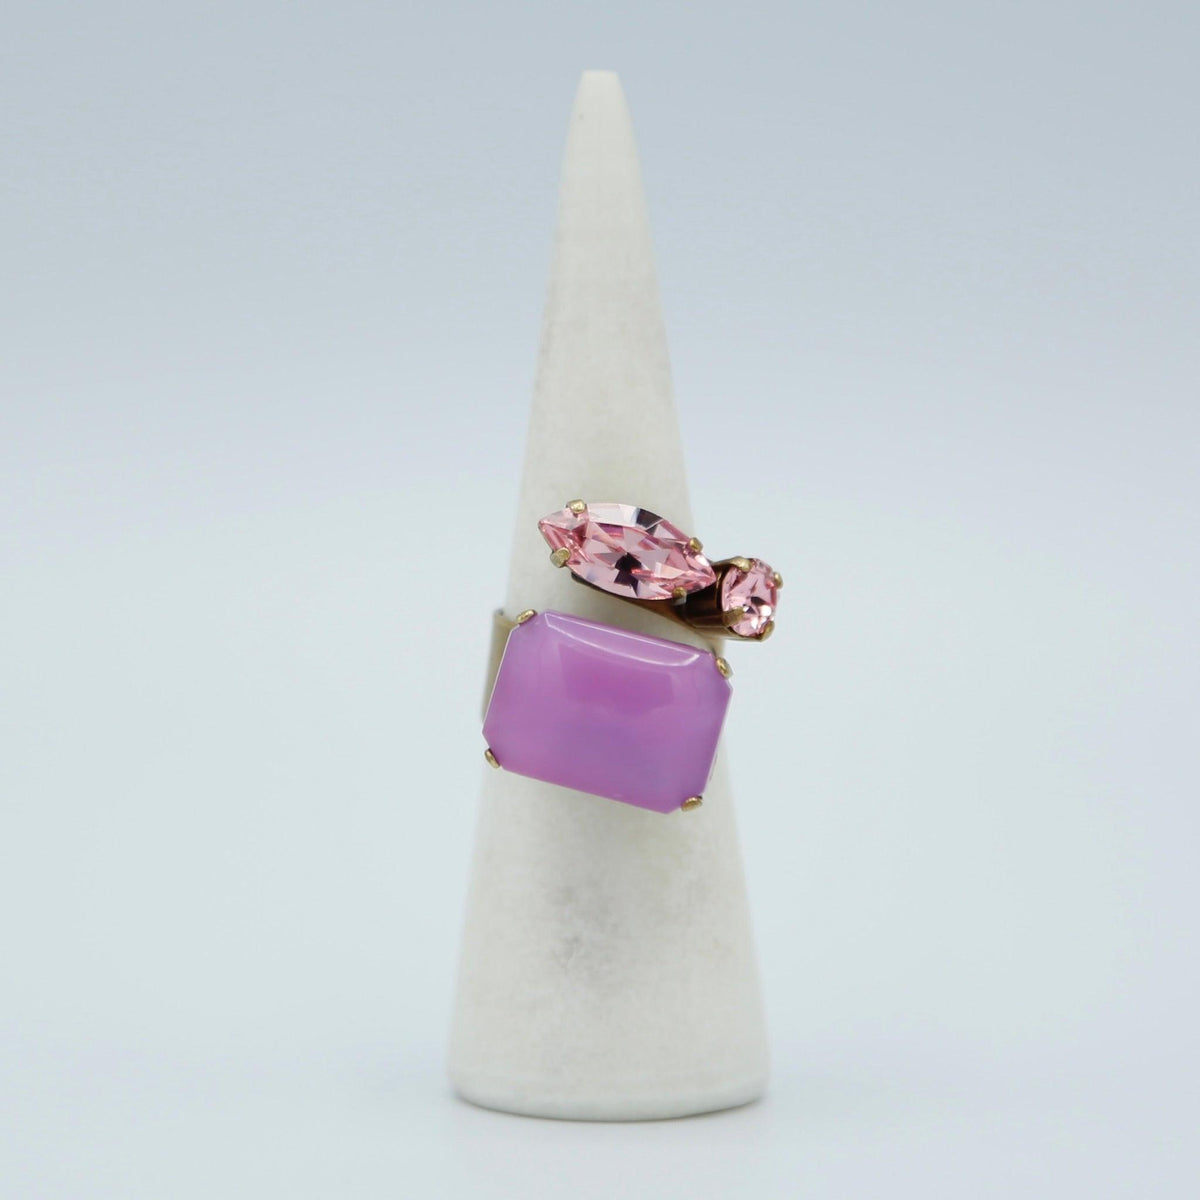 Pink Nature Ring with Glass Stones - Vita Isola